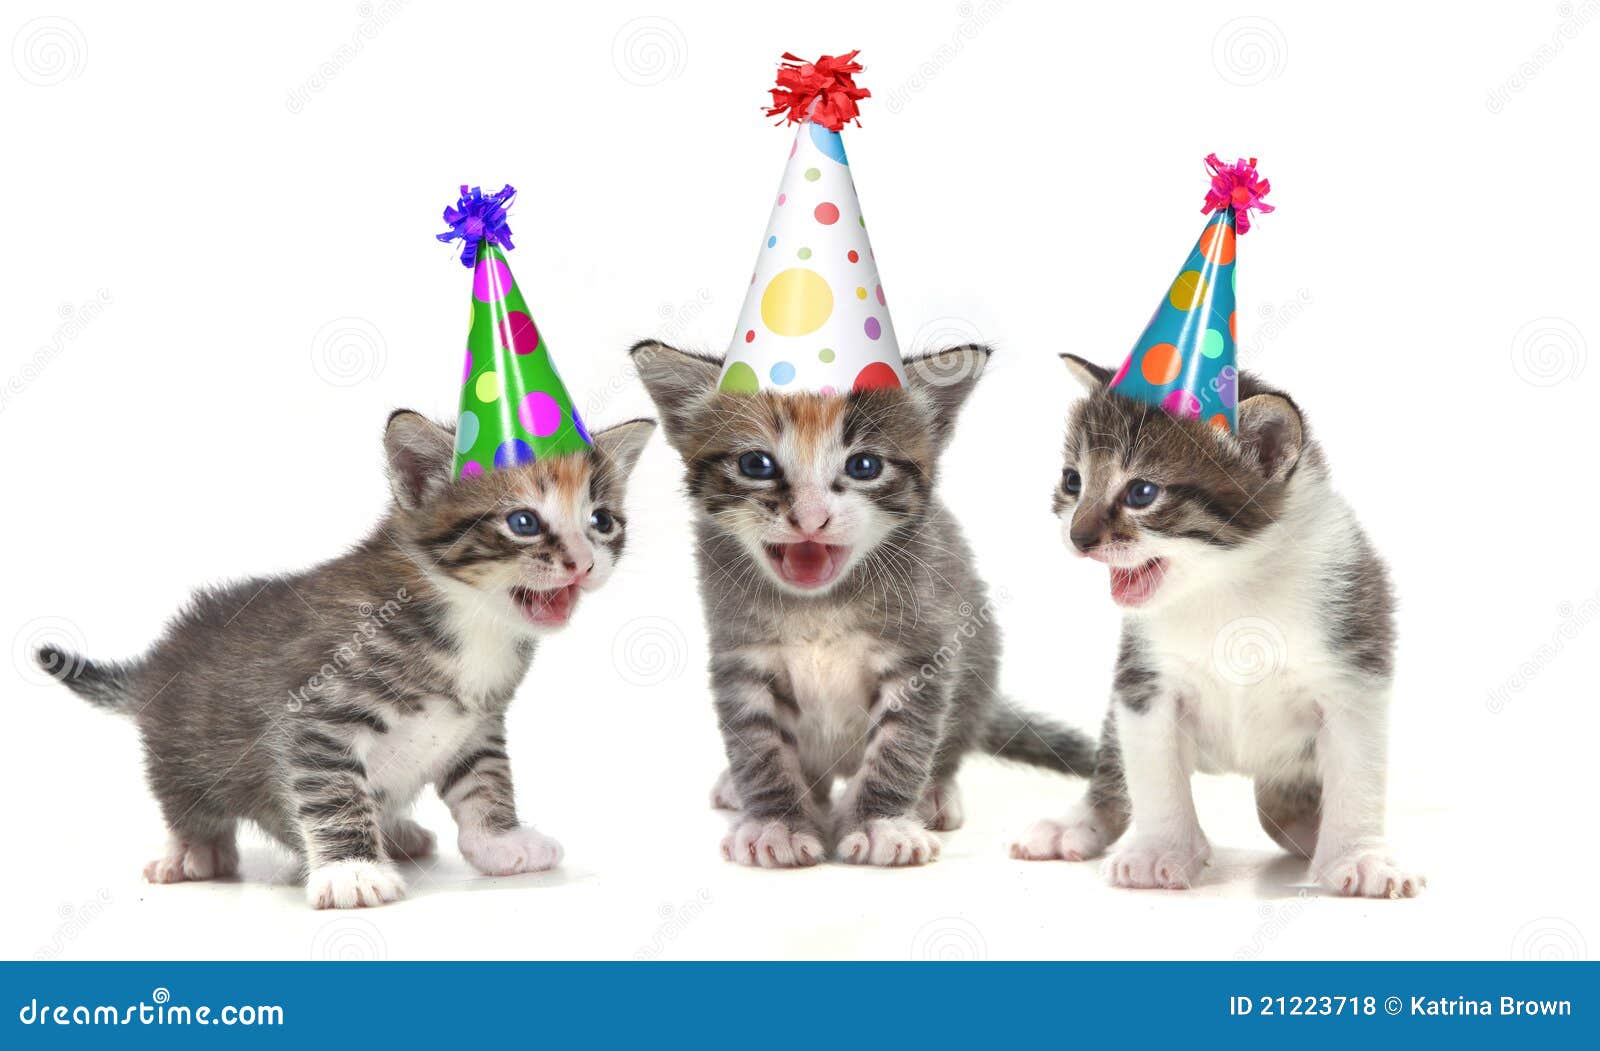 Birthday Song Singing Kittens On White Background Royalty Free Stock